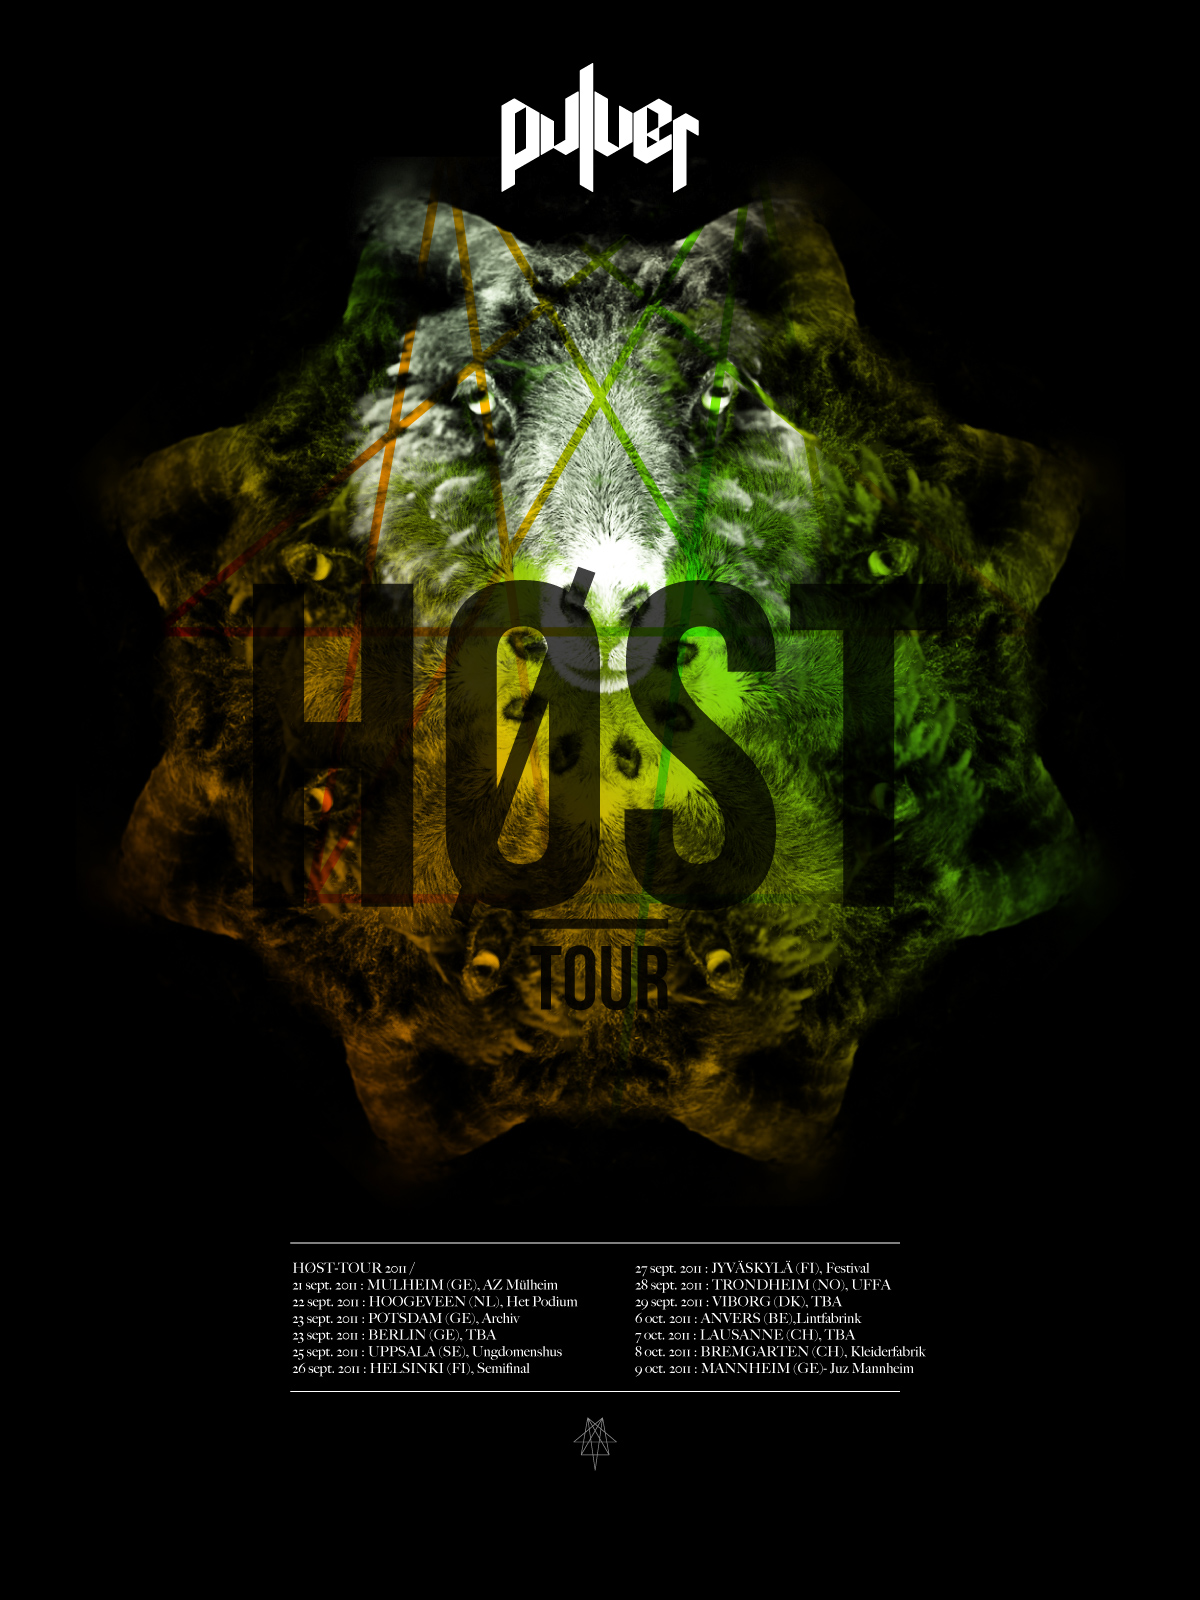 Pulver Høst tour in Germania, Helvetia and Scandinavia.